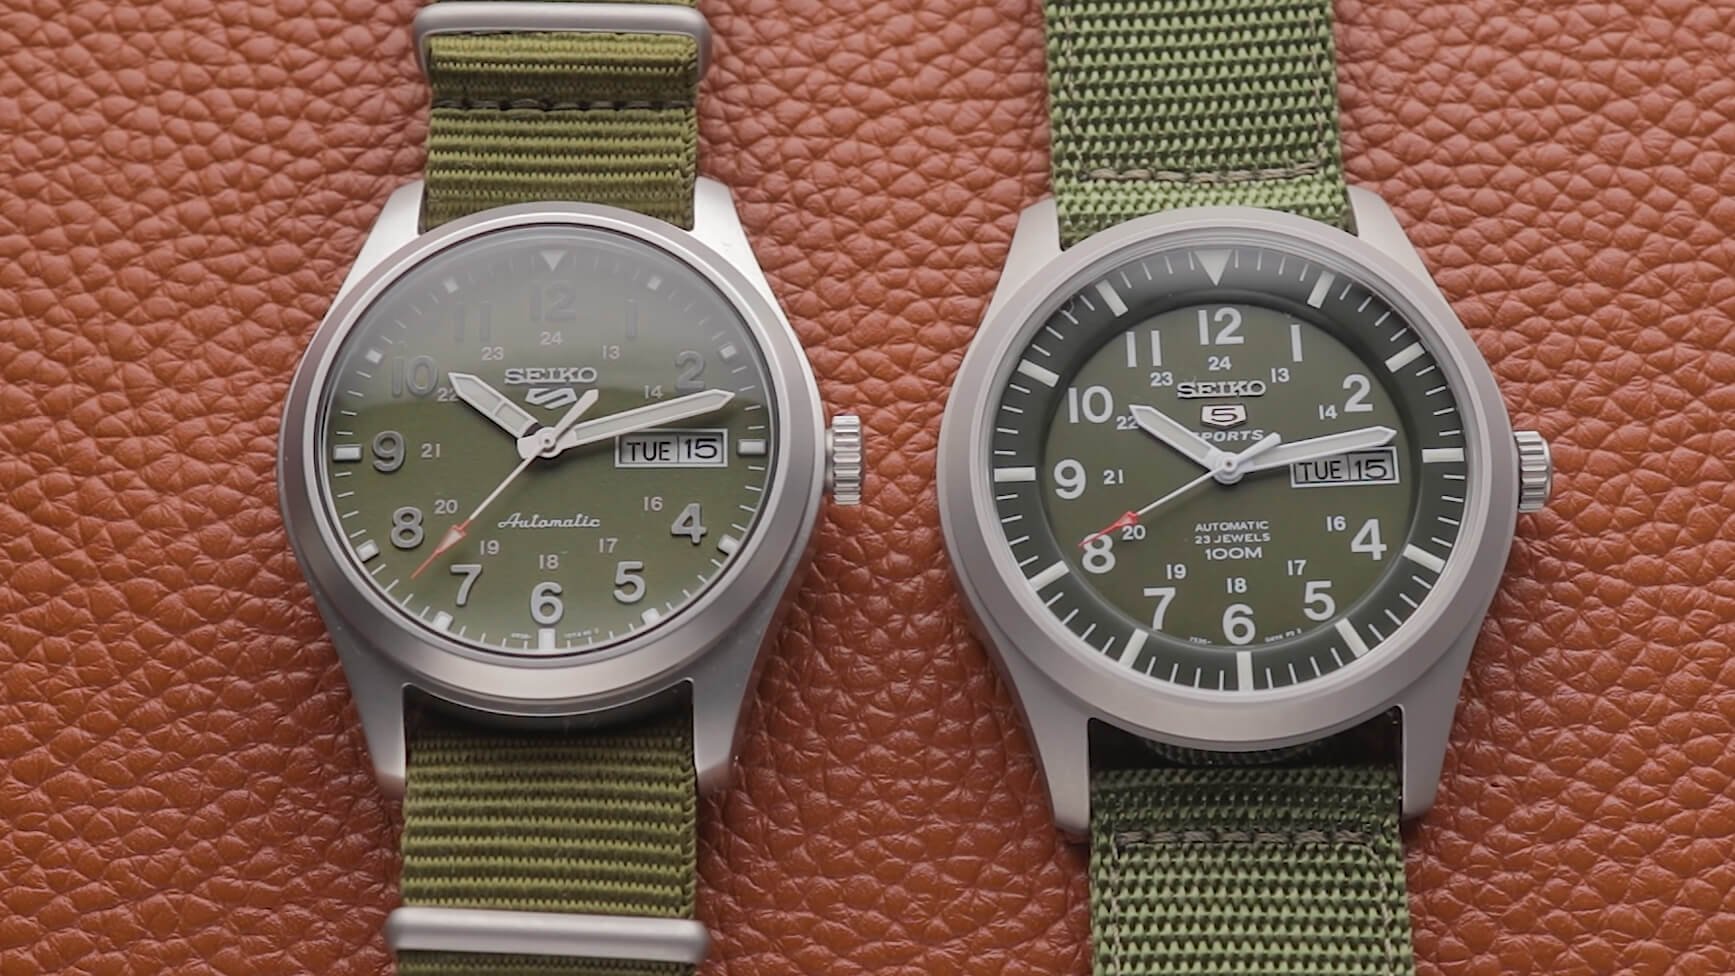 Are the new Seiko 5 watches ACTUALLY worse? – Old vs New Seiko Field ...